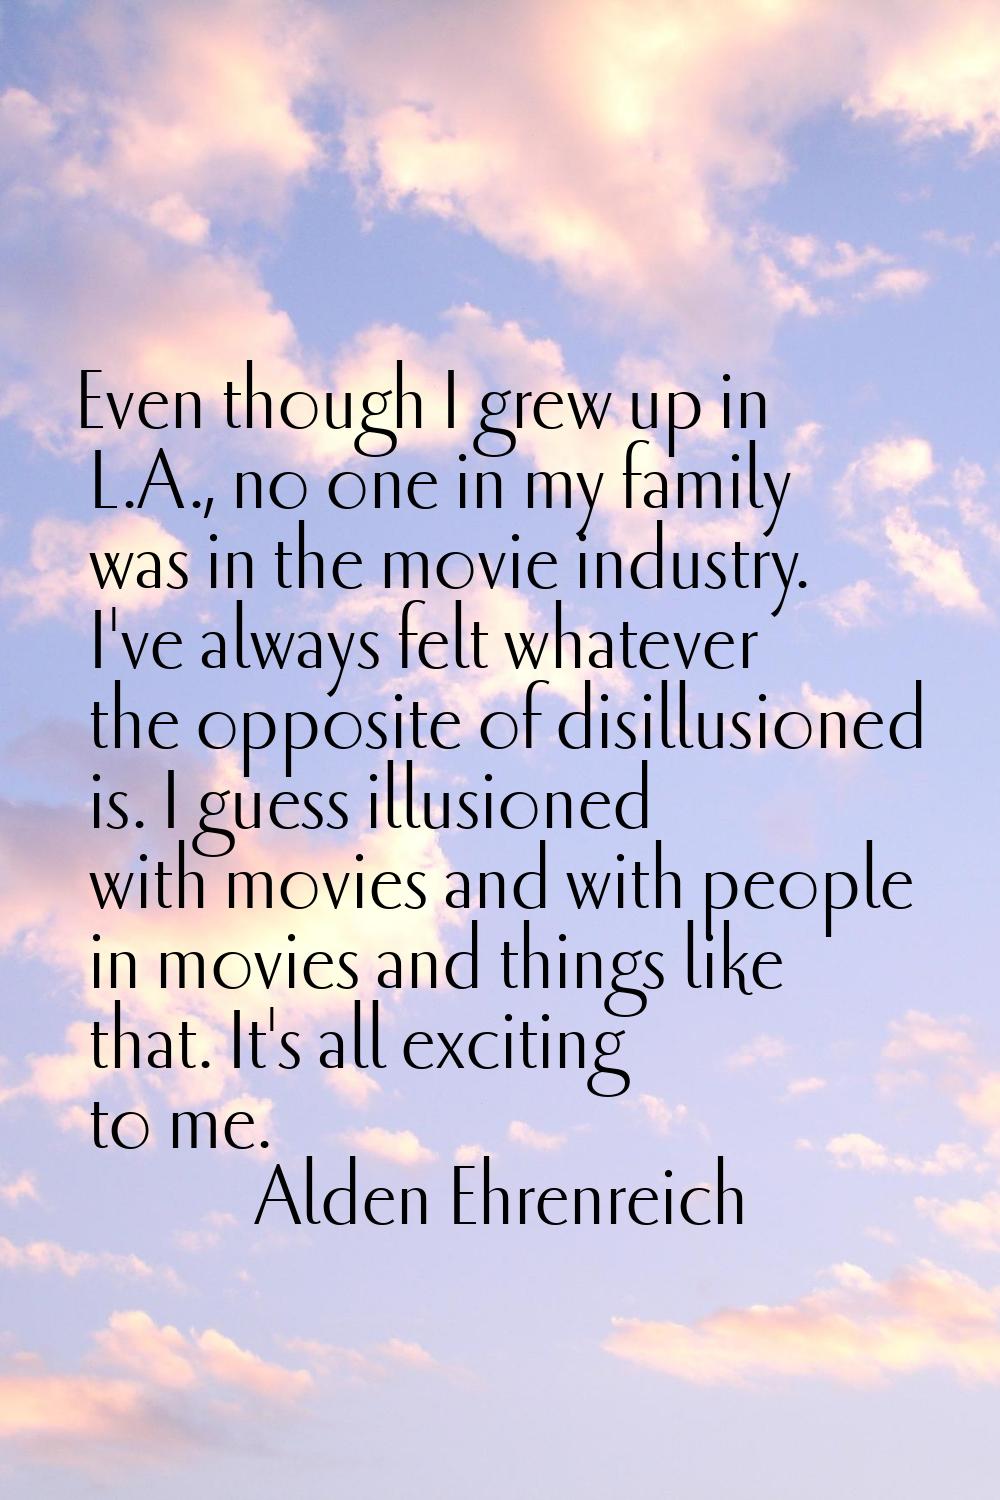 Even though I grew up in L.A., no one in my family was in the movie industry. I've always felt what